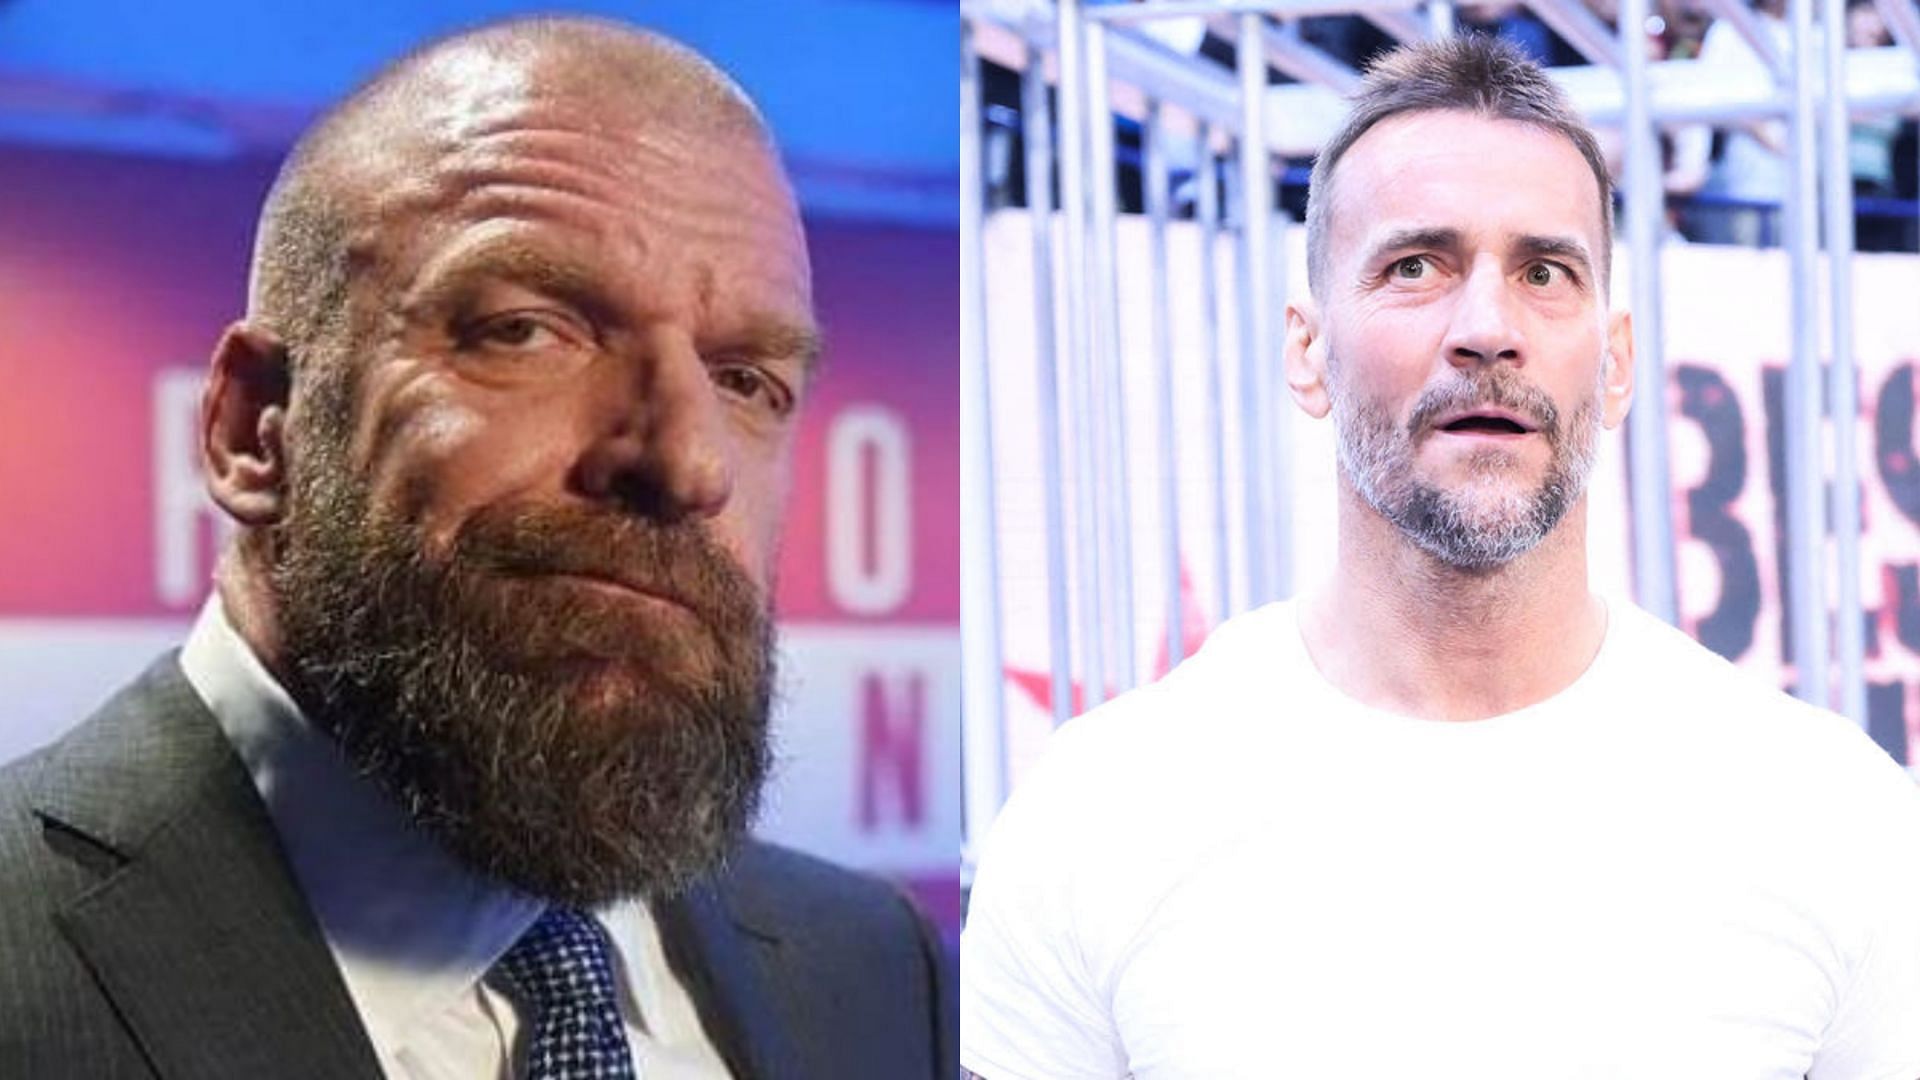 WWE Chief Content Officer Triple H (left) and CM Punk (right)